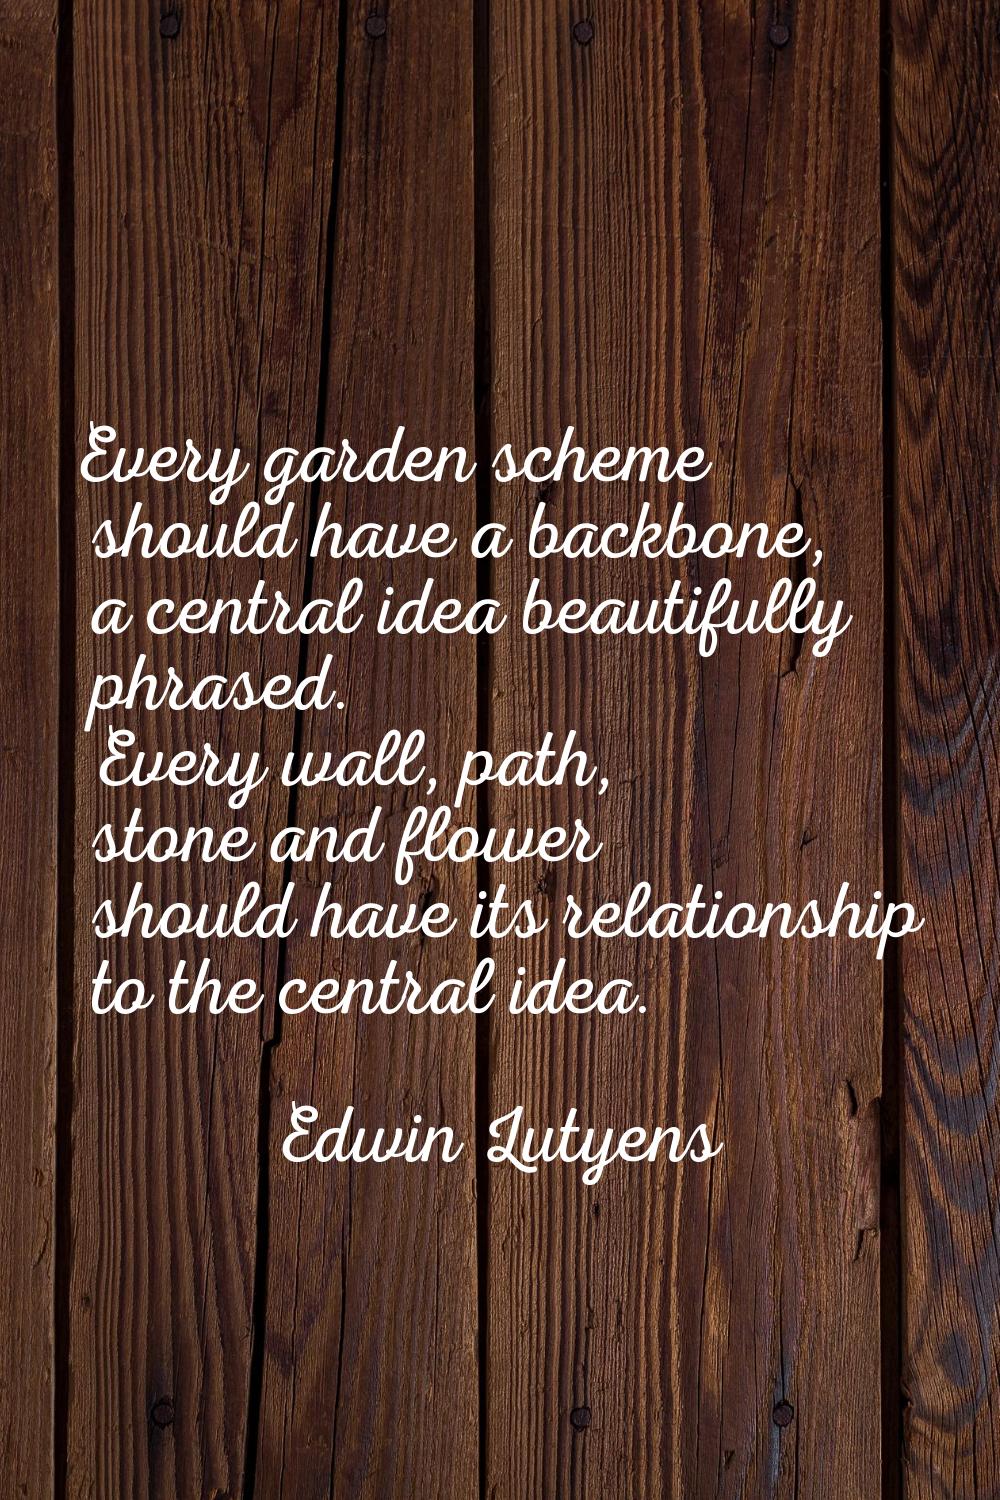 Every garden scheme should have a backbone, a central idea beautifully phrased. Every wall, path, s